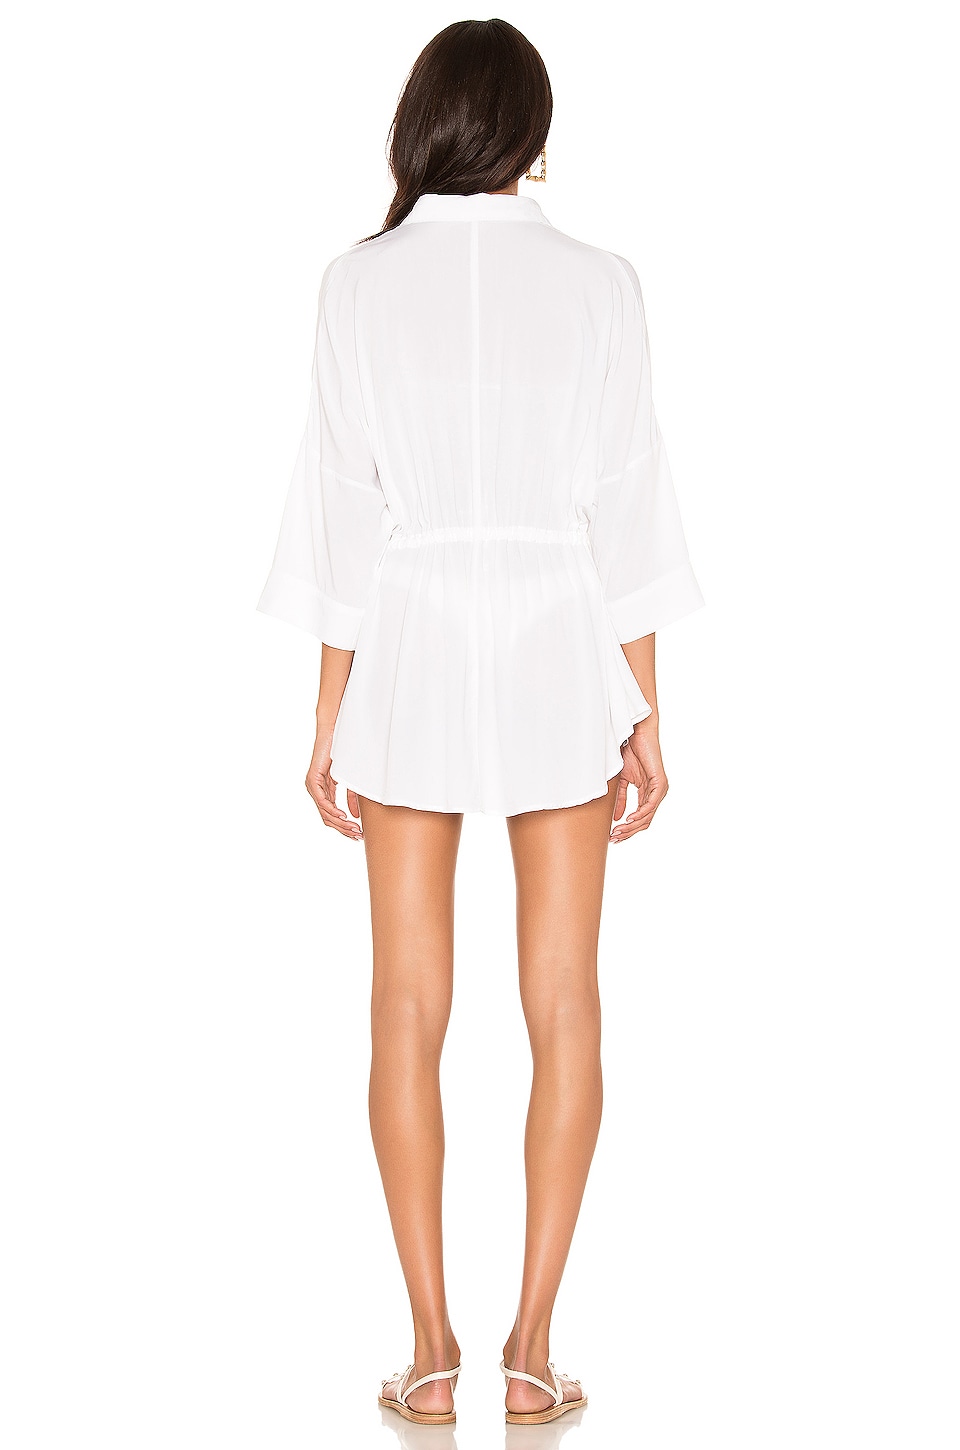 L*SPACE Pacifica Shirt Dress in White | REVOLVE